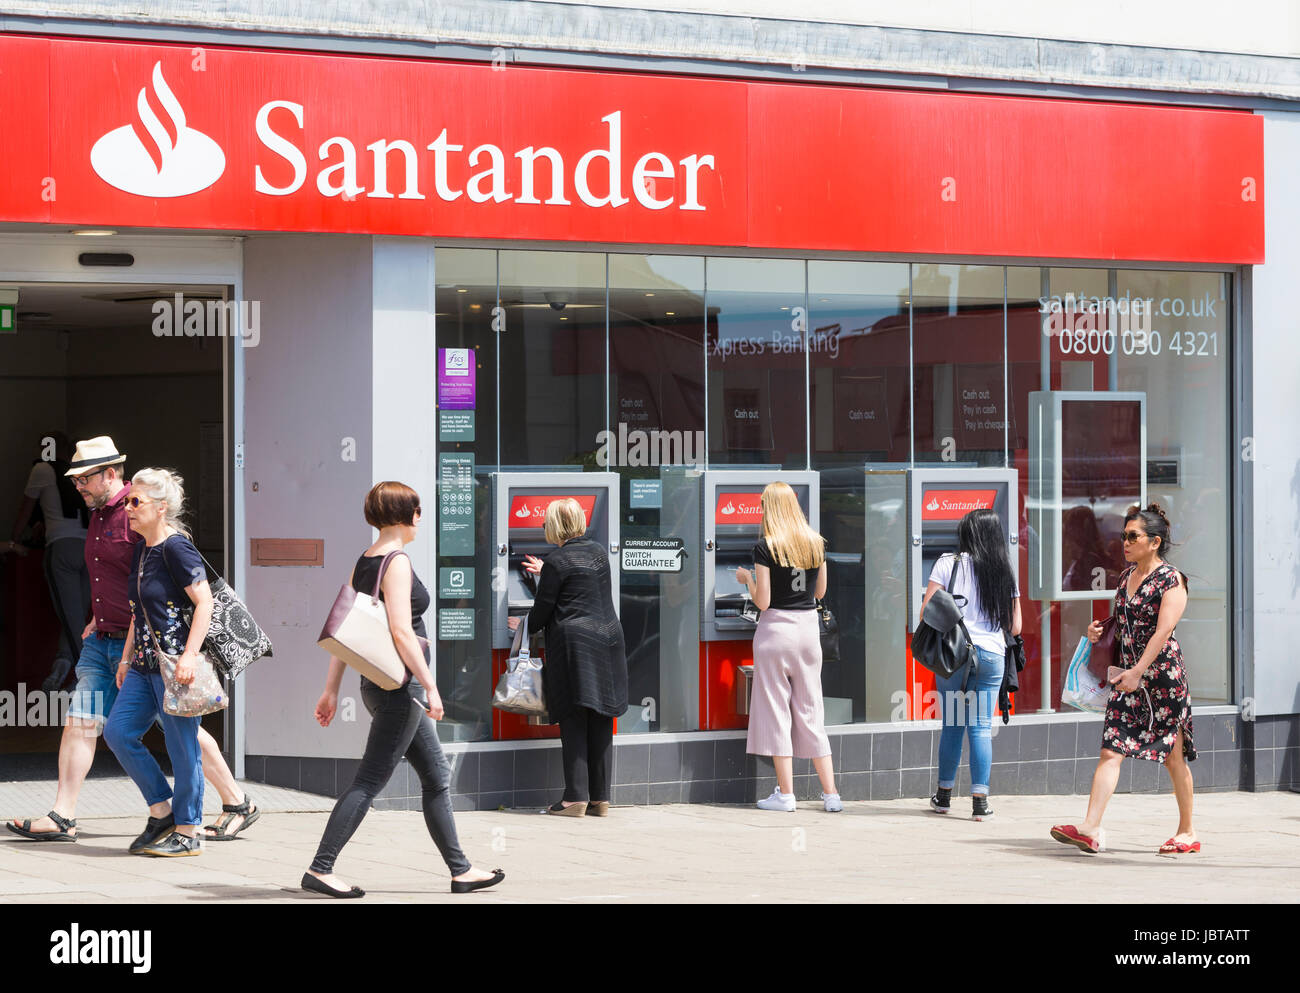 Santander bank in a UK high street with people using cash machines. Stock Photo